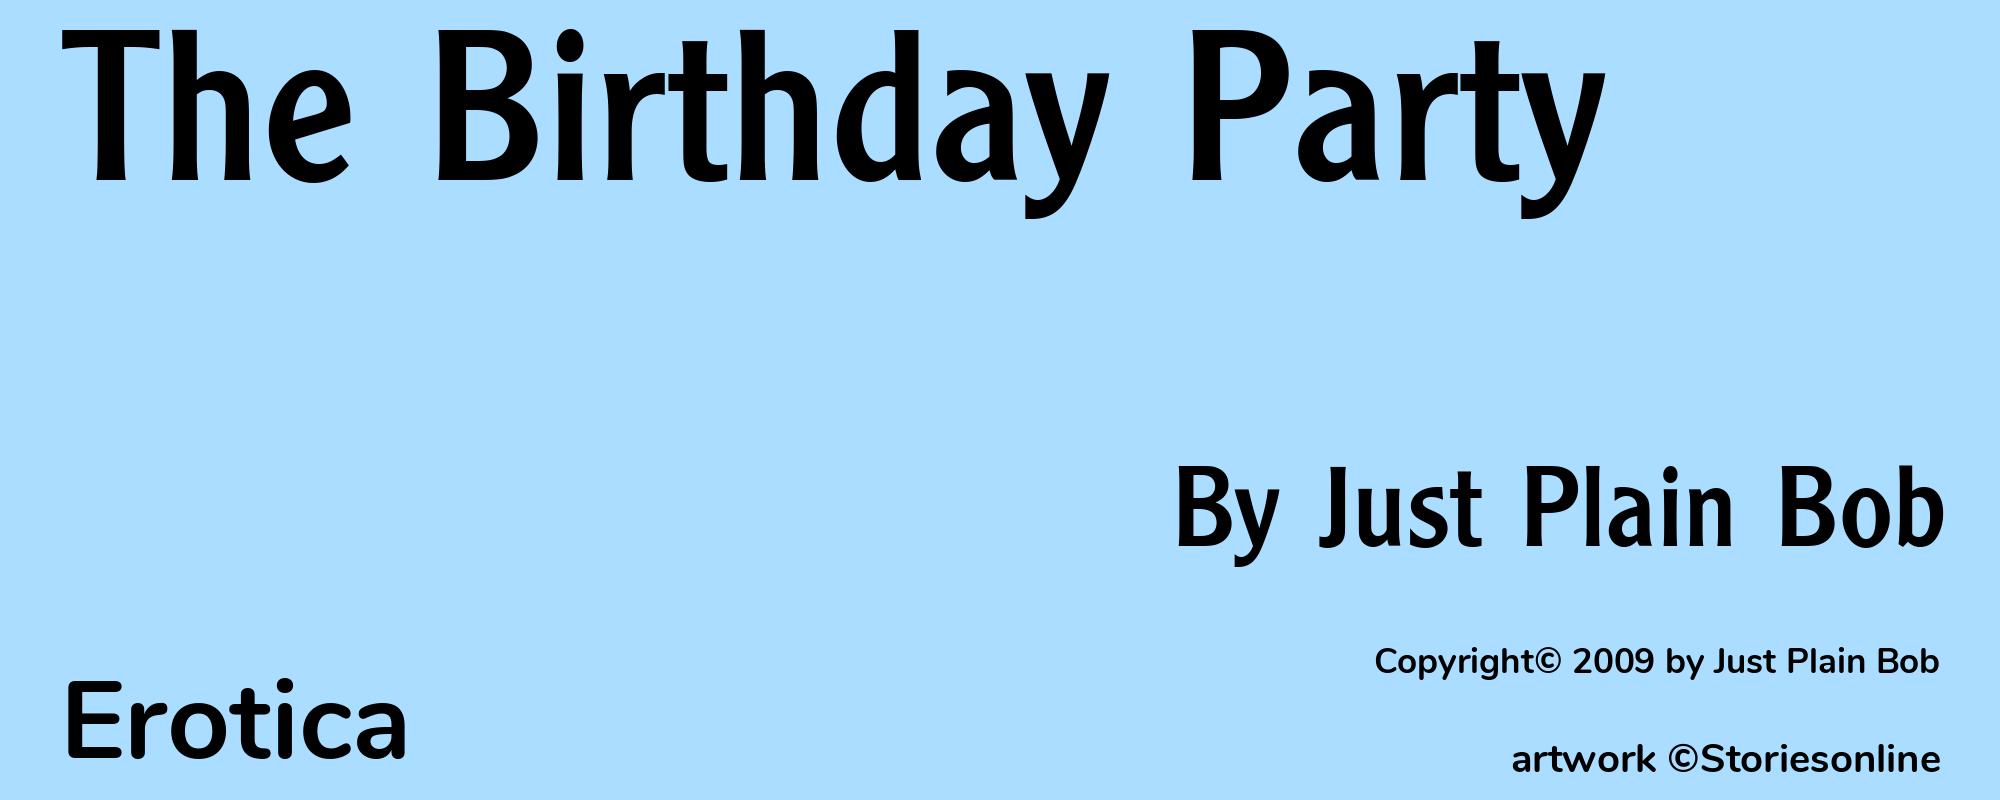 The Birthday Party - Cover